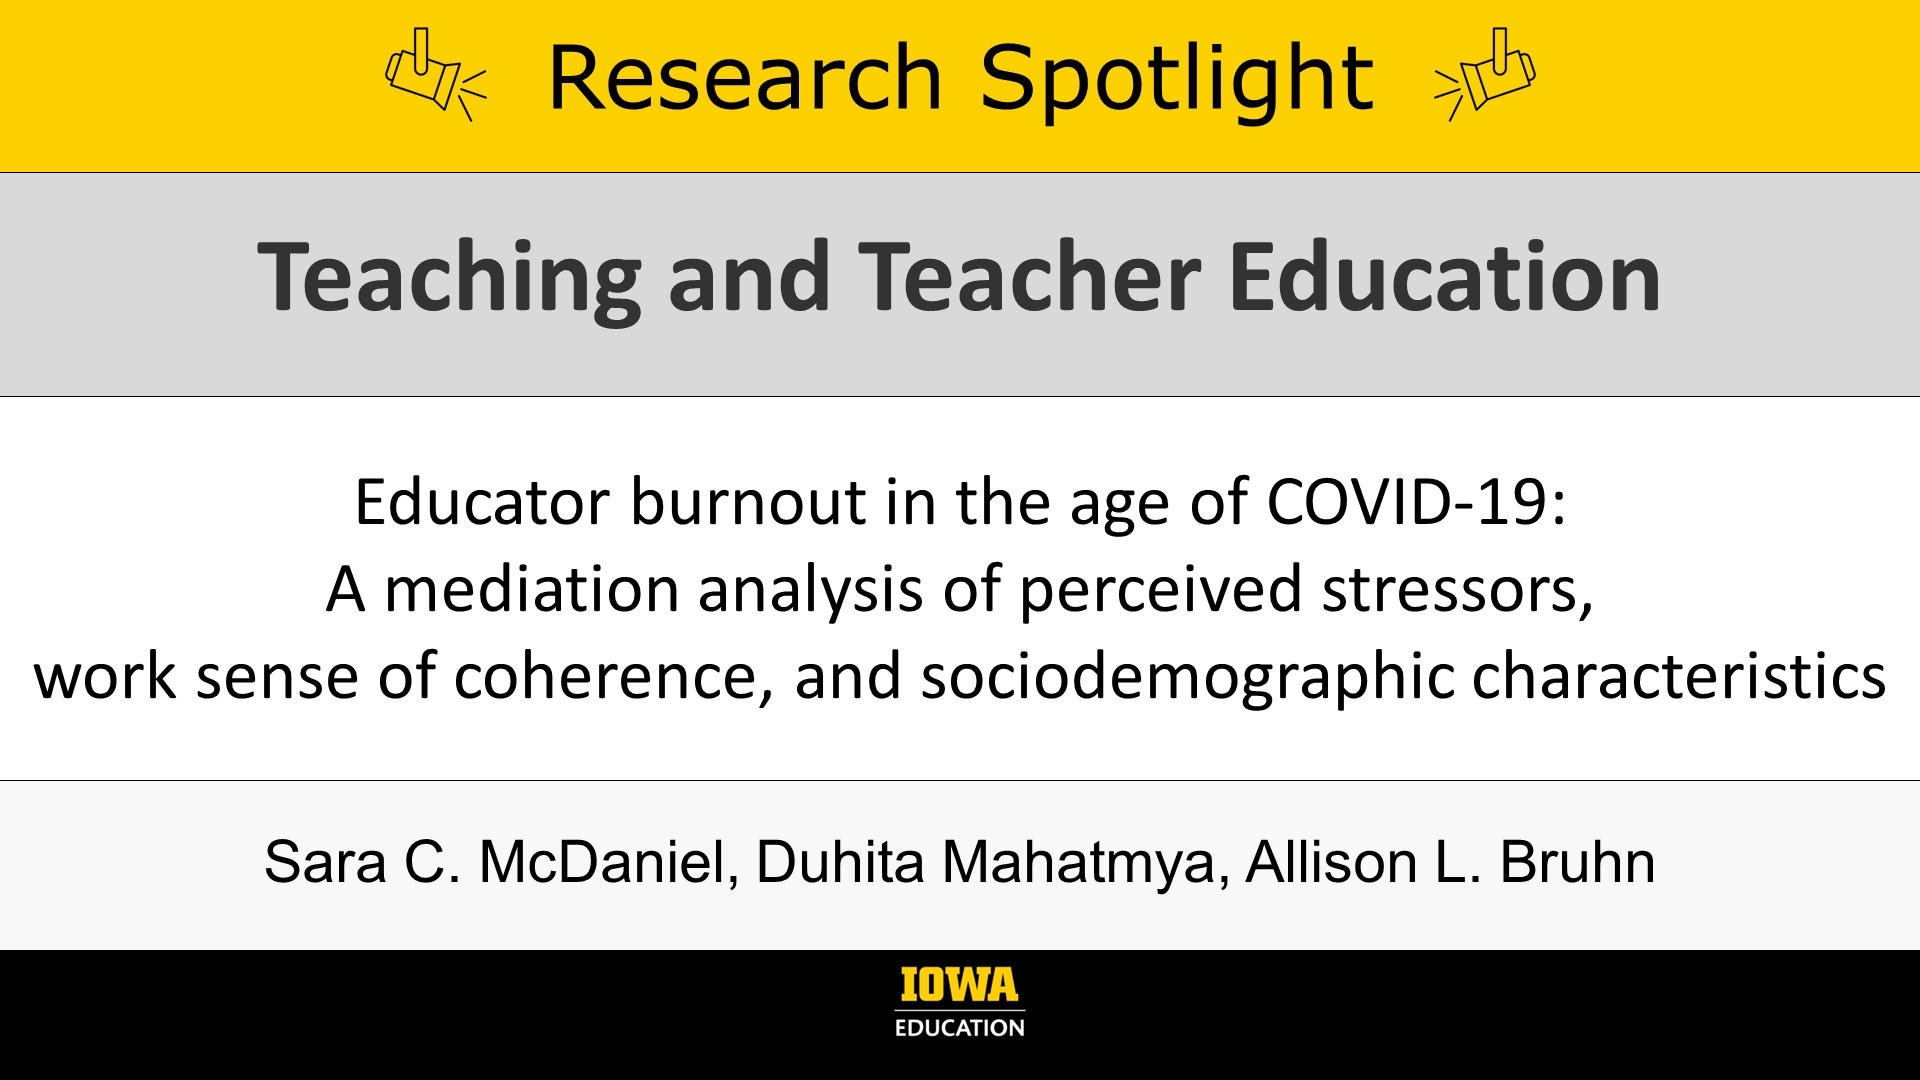 Research Spotlight: Educator burnout in the age of COVID-19: A mediation analysis of perceived stressors, work sense of coherence, and sociodemographic characteristics. In Teaching and Teacher Education